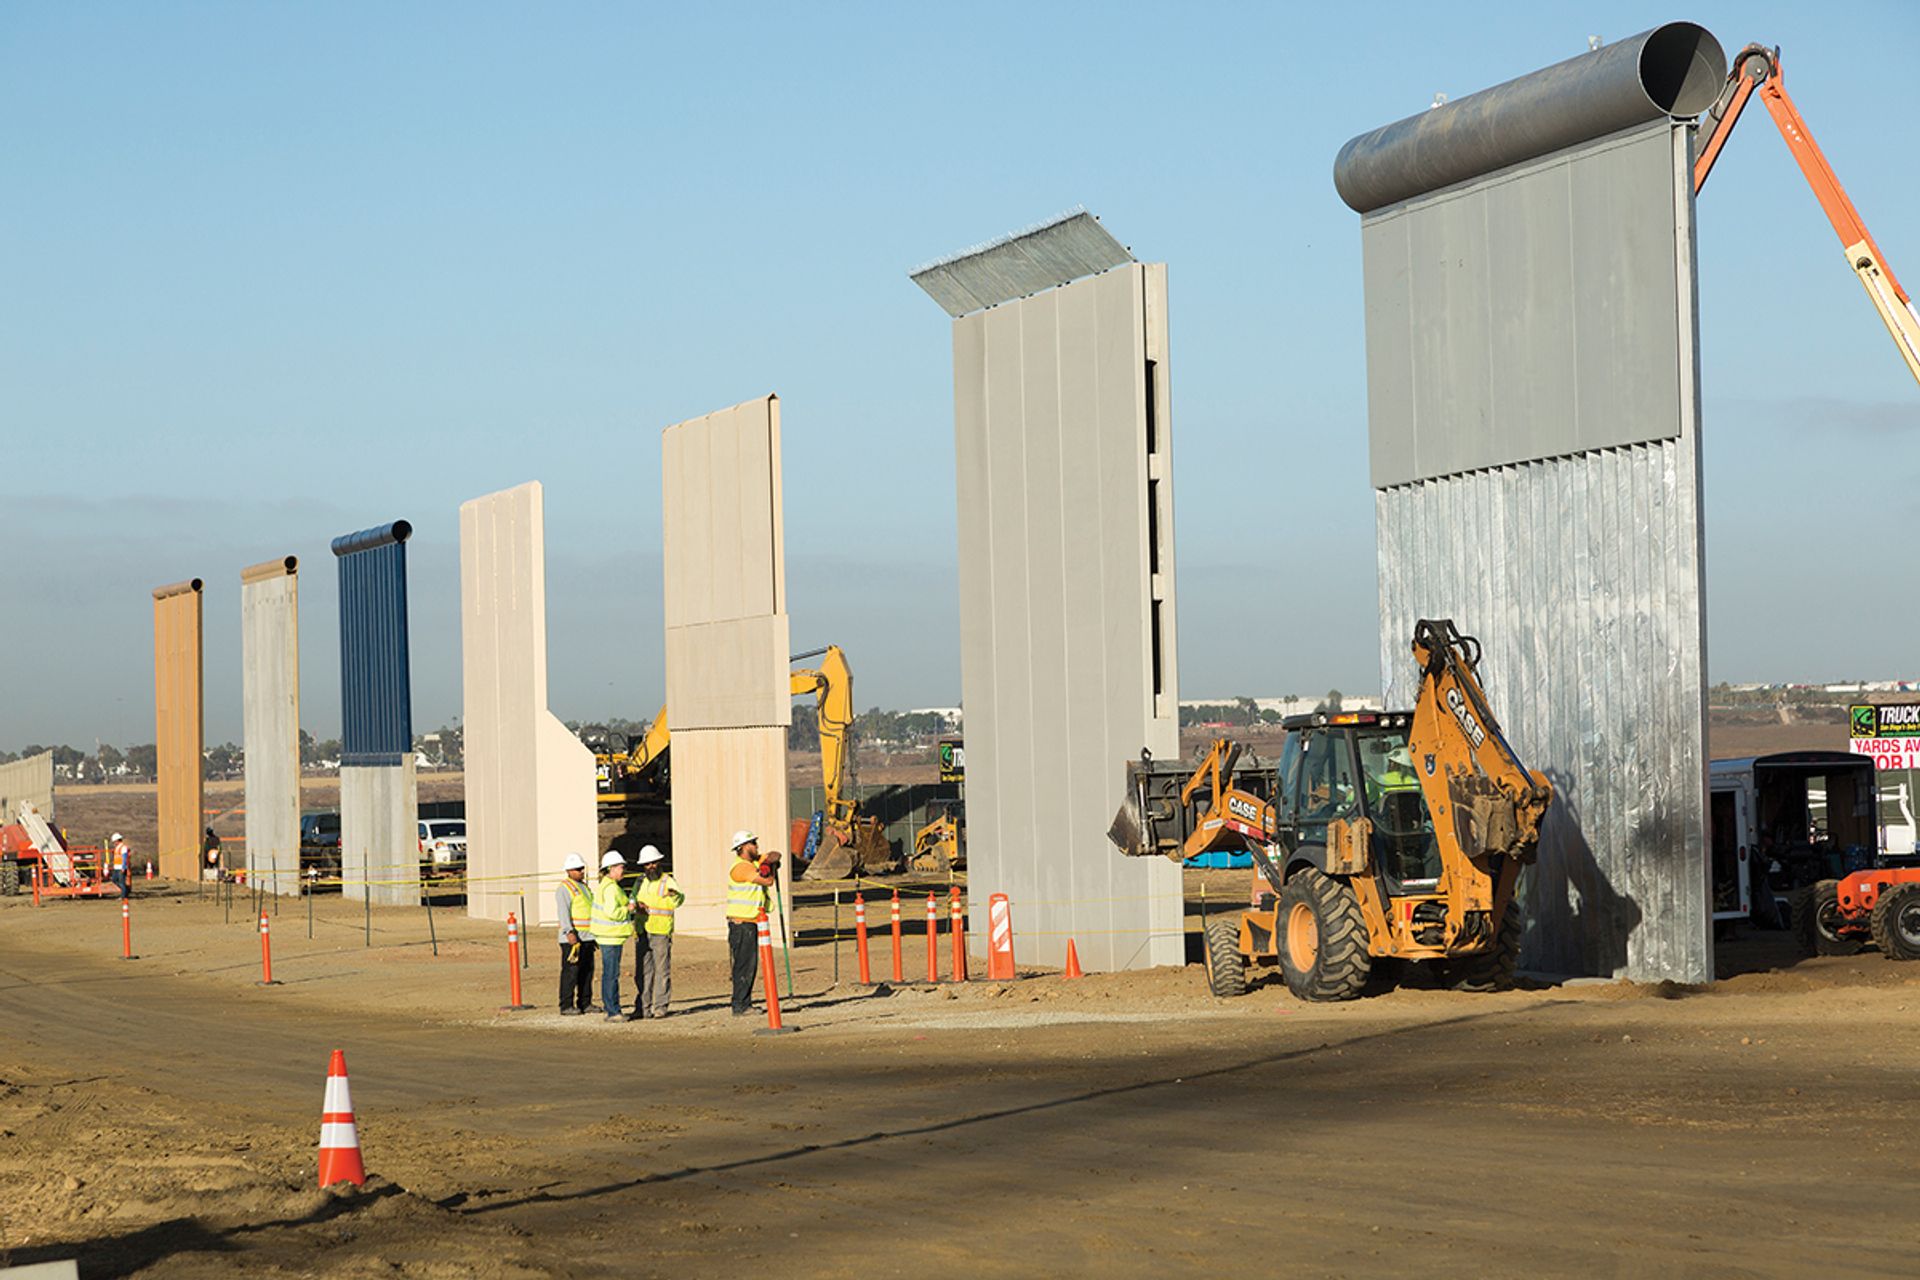 Büchel’s M.A.G.A. organisation believes that the border-wall prototypes are “historical land art” Mani Albrecht/US Customs and Border Protection